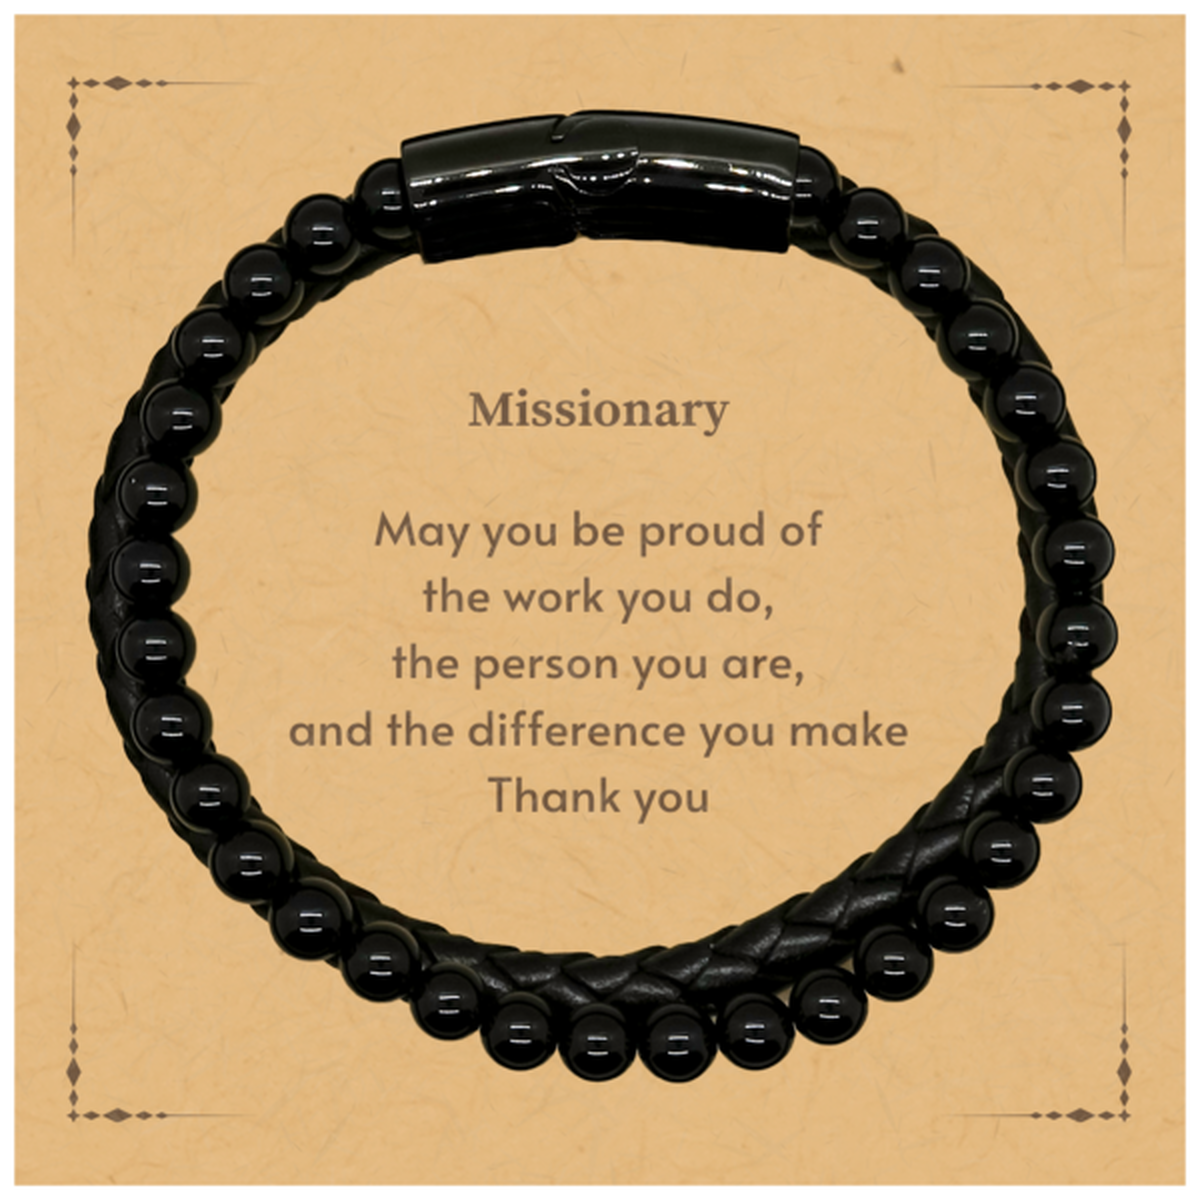 Heartwarming Stone Leather Bracelets Retirement Coworkers Gifts for Missionary, Missionary May You be proud of the work you do, the person you are Gifts for Boss Men Women Friends